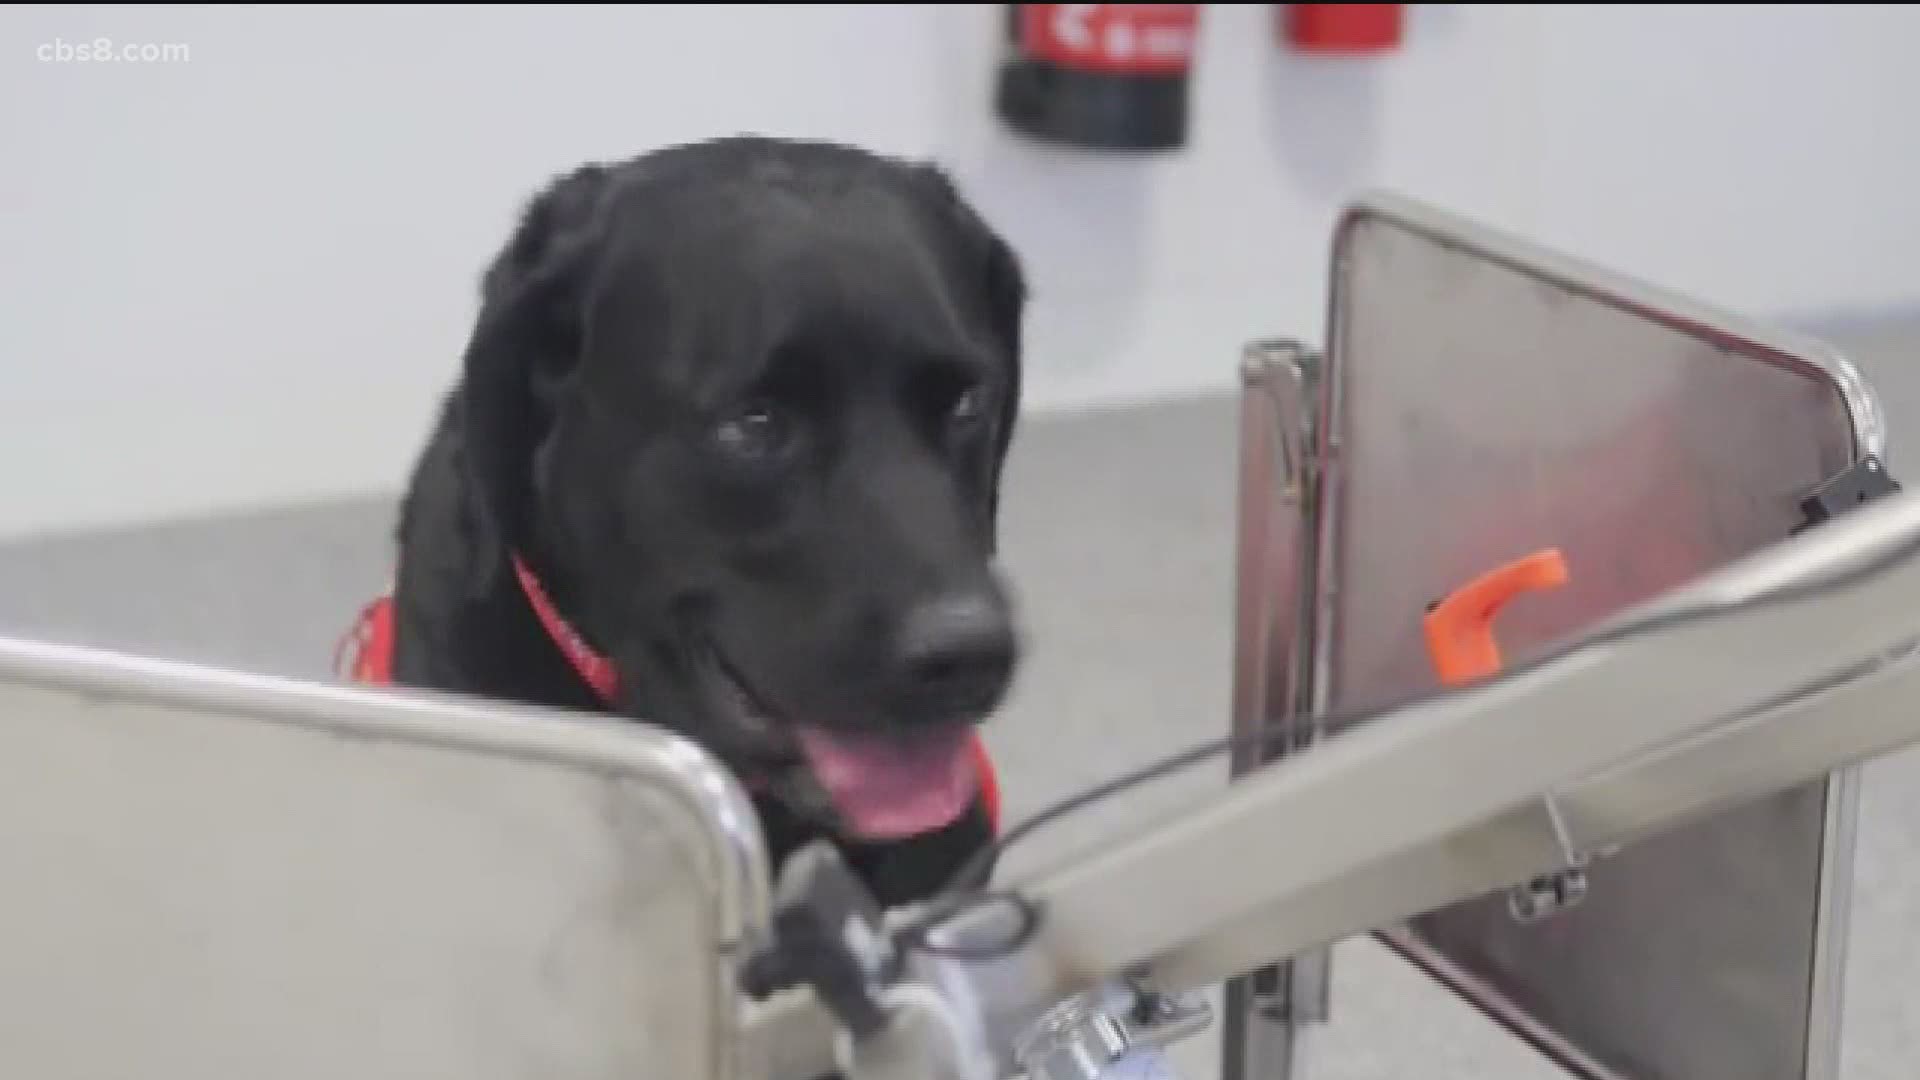 Researchers said if successful, scent-detection dogs could help prevent spread of the virus.